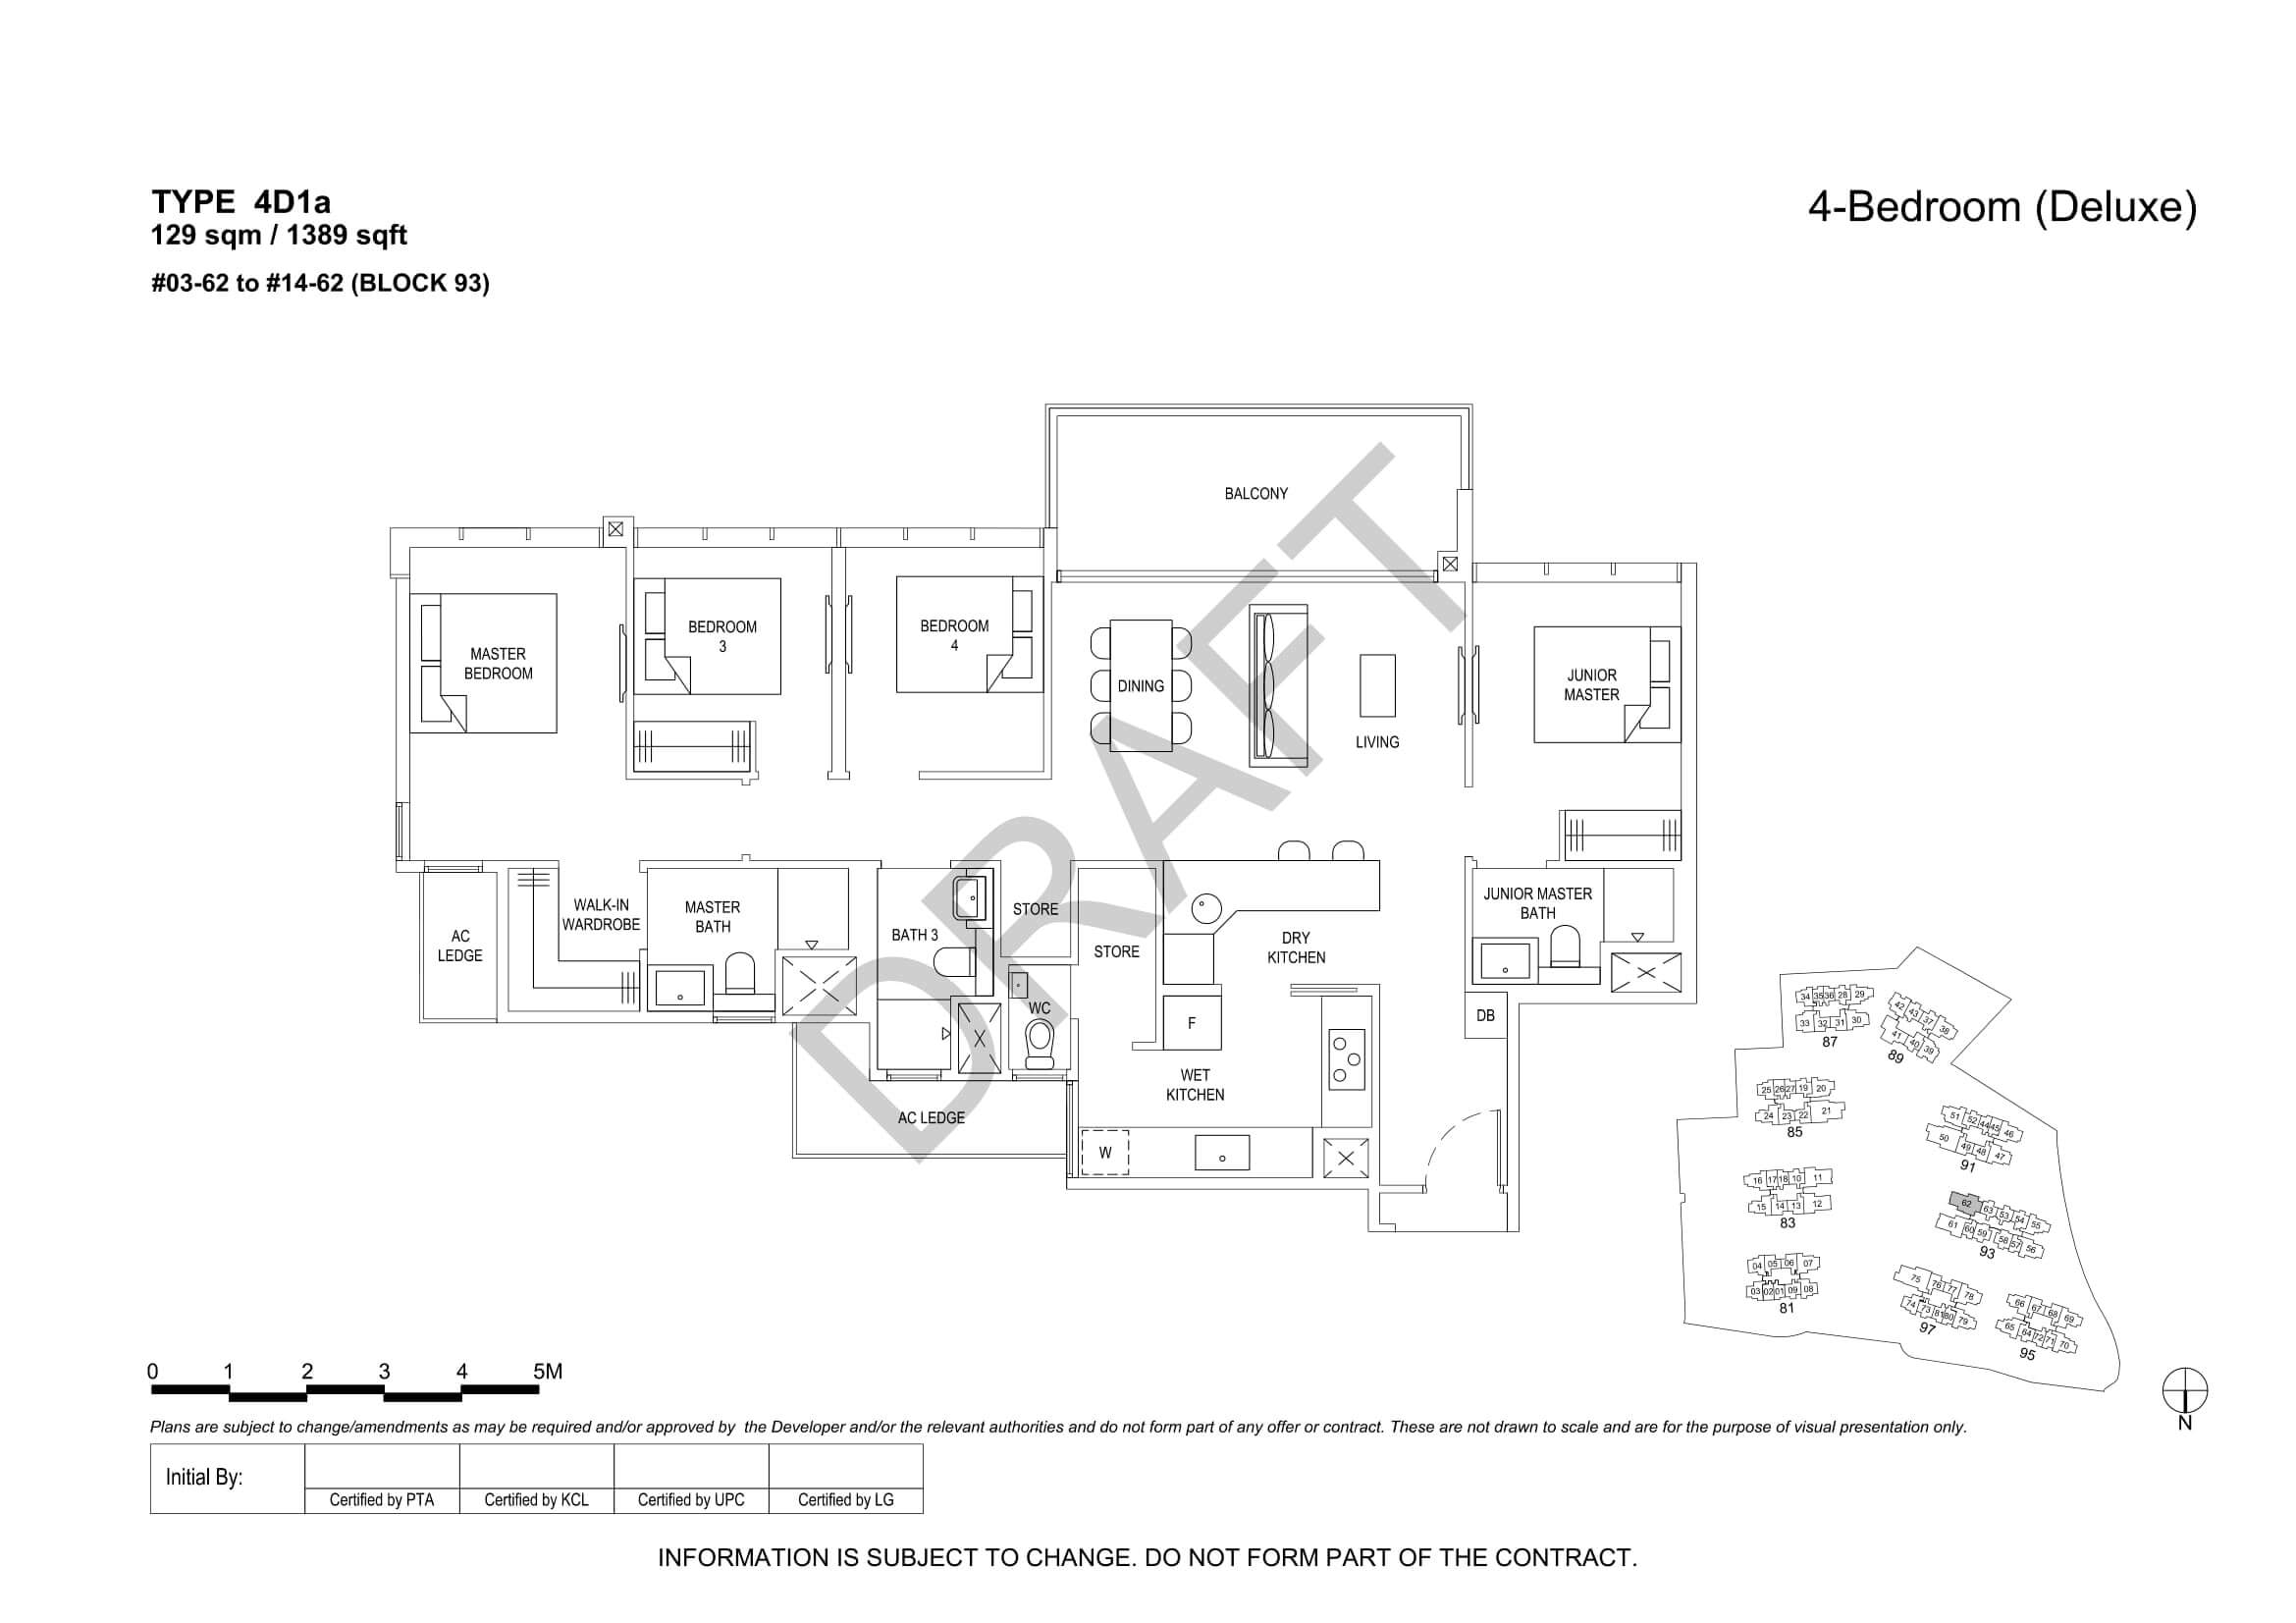 The Florence Residences Floor Plan 4-Bedroom Type 4D1a